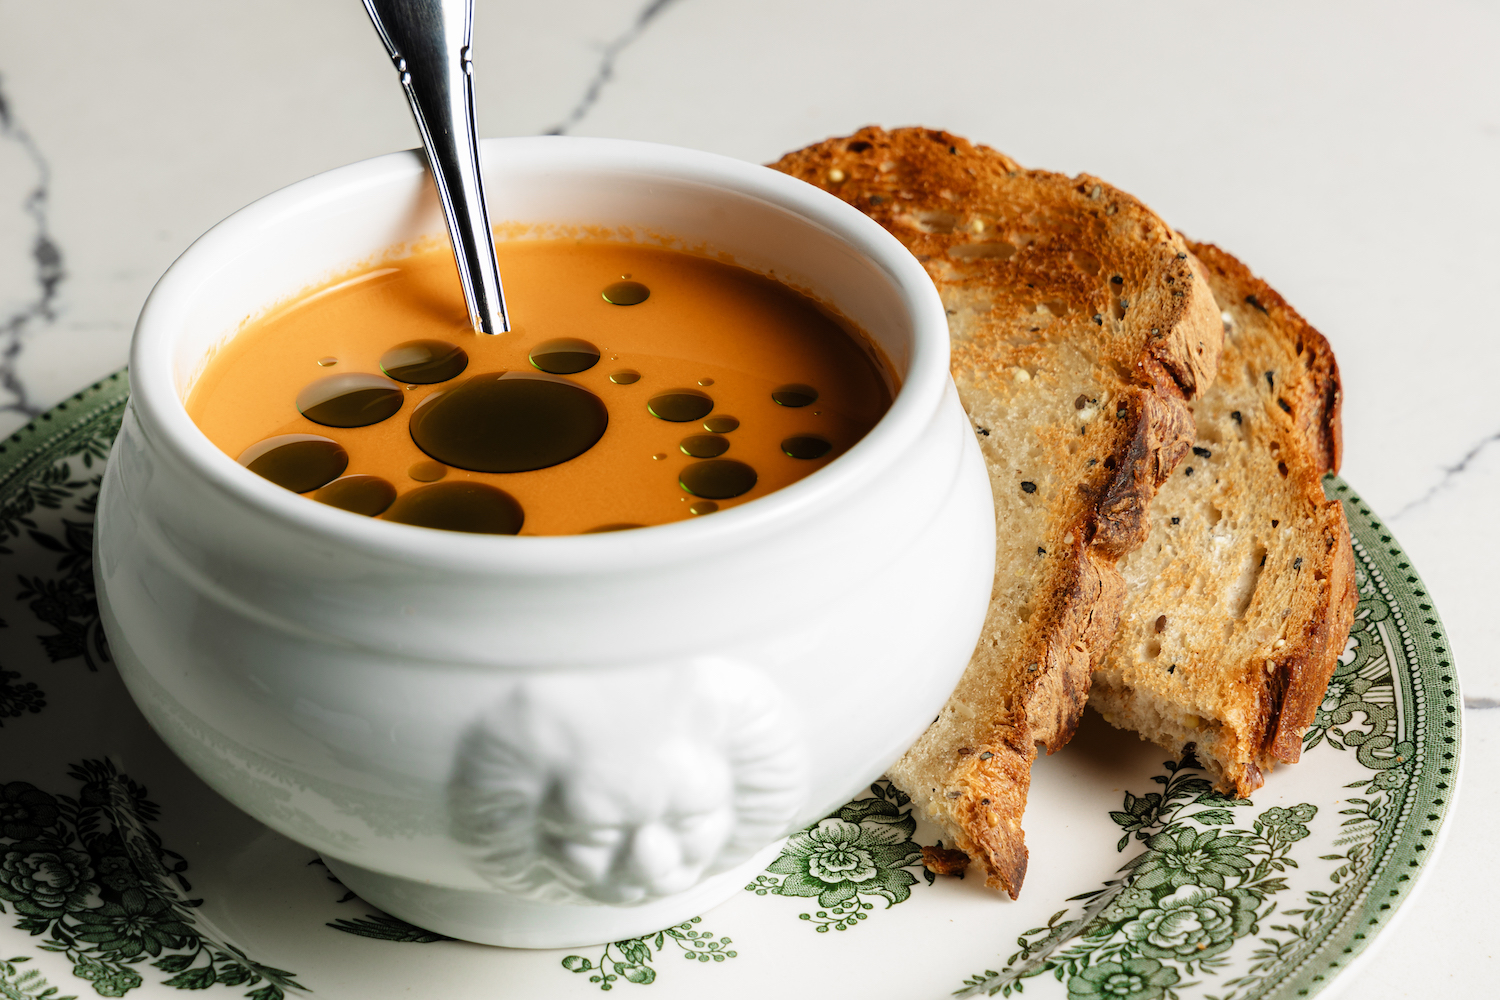 soup in a bowl with bread on the side.